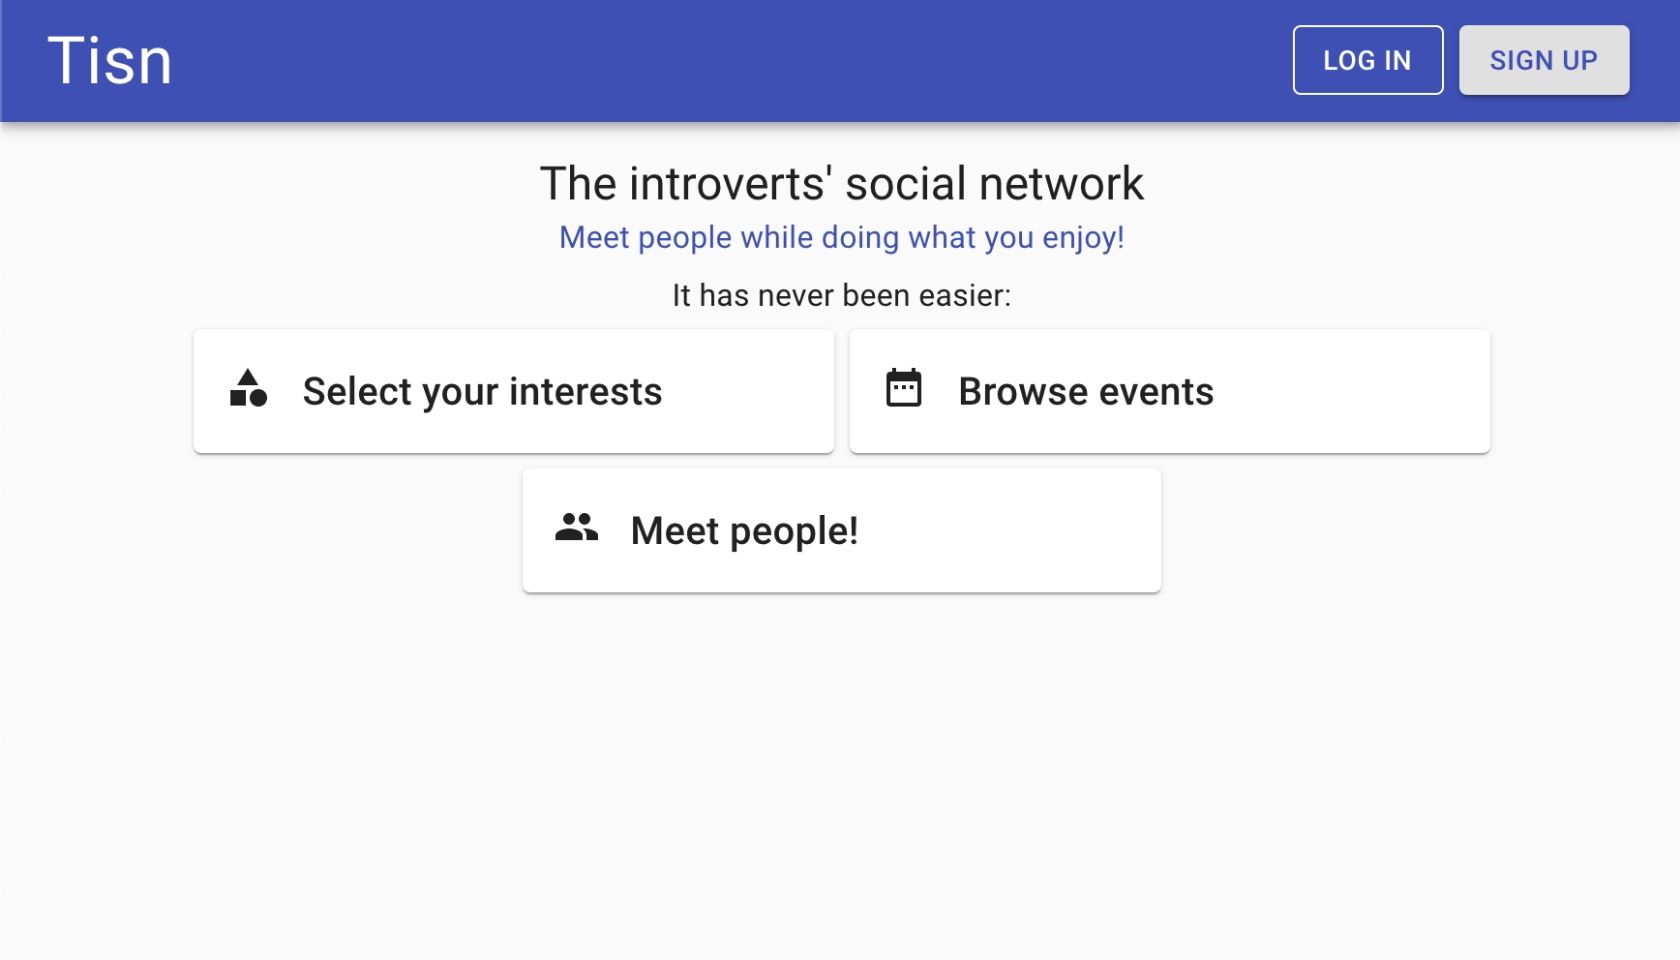 Tisn - The introverts' social network